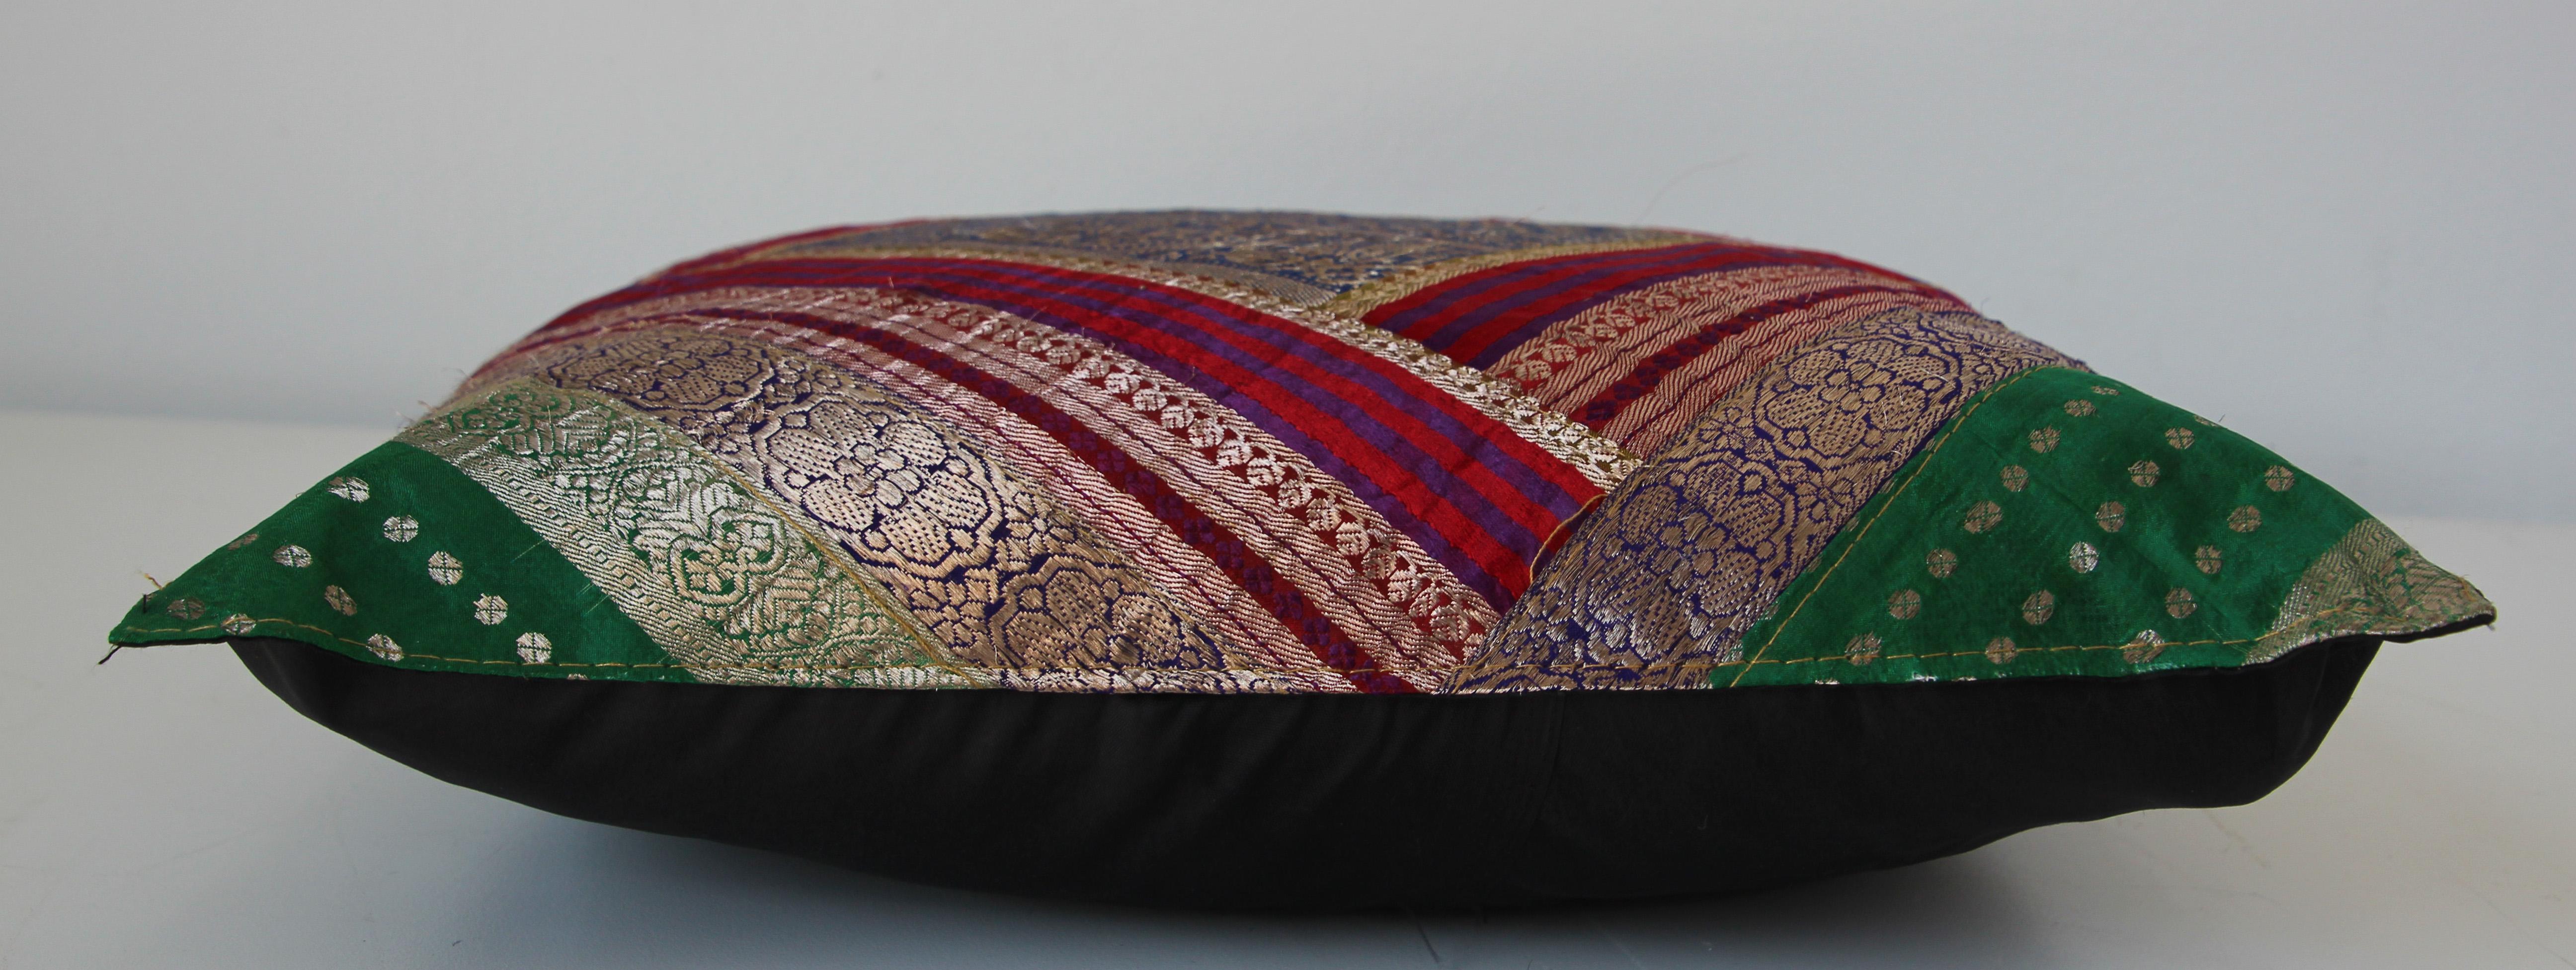 Fabric Decorative Throw Pillow Made from Vintage Sari Borders, India For Sale